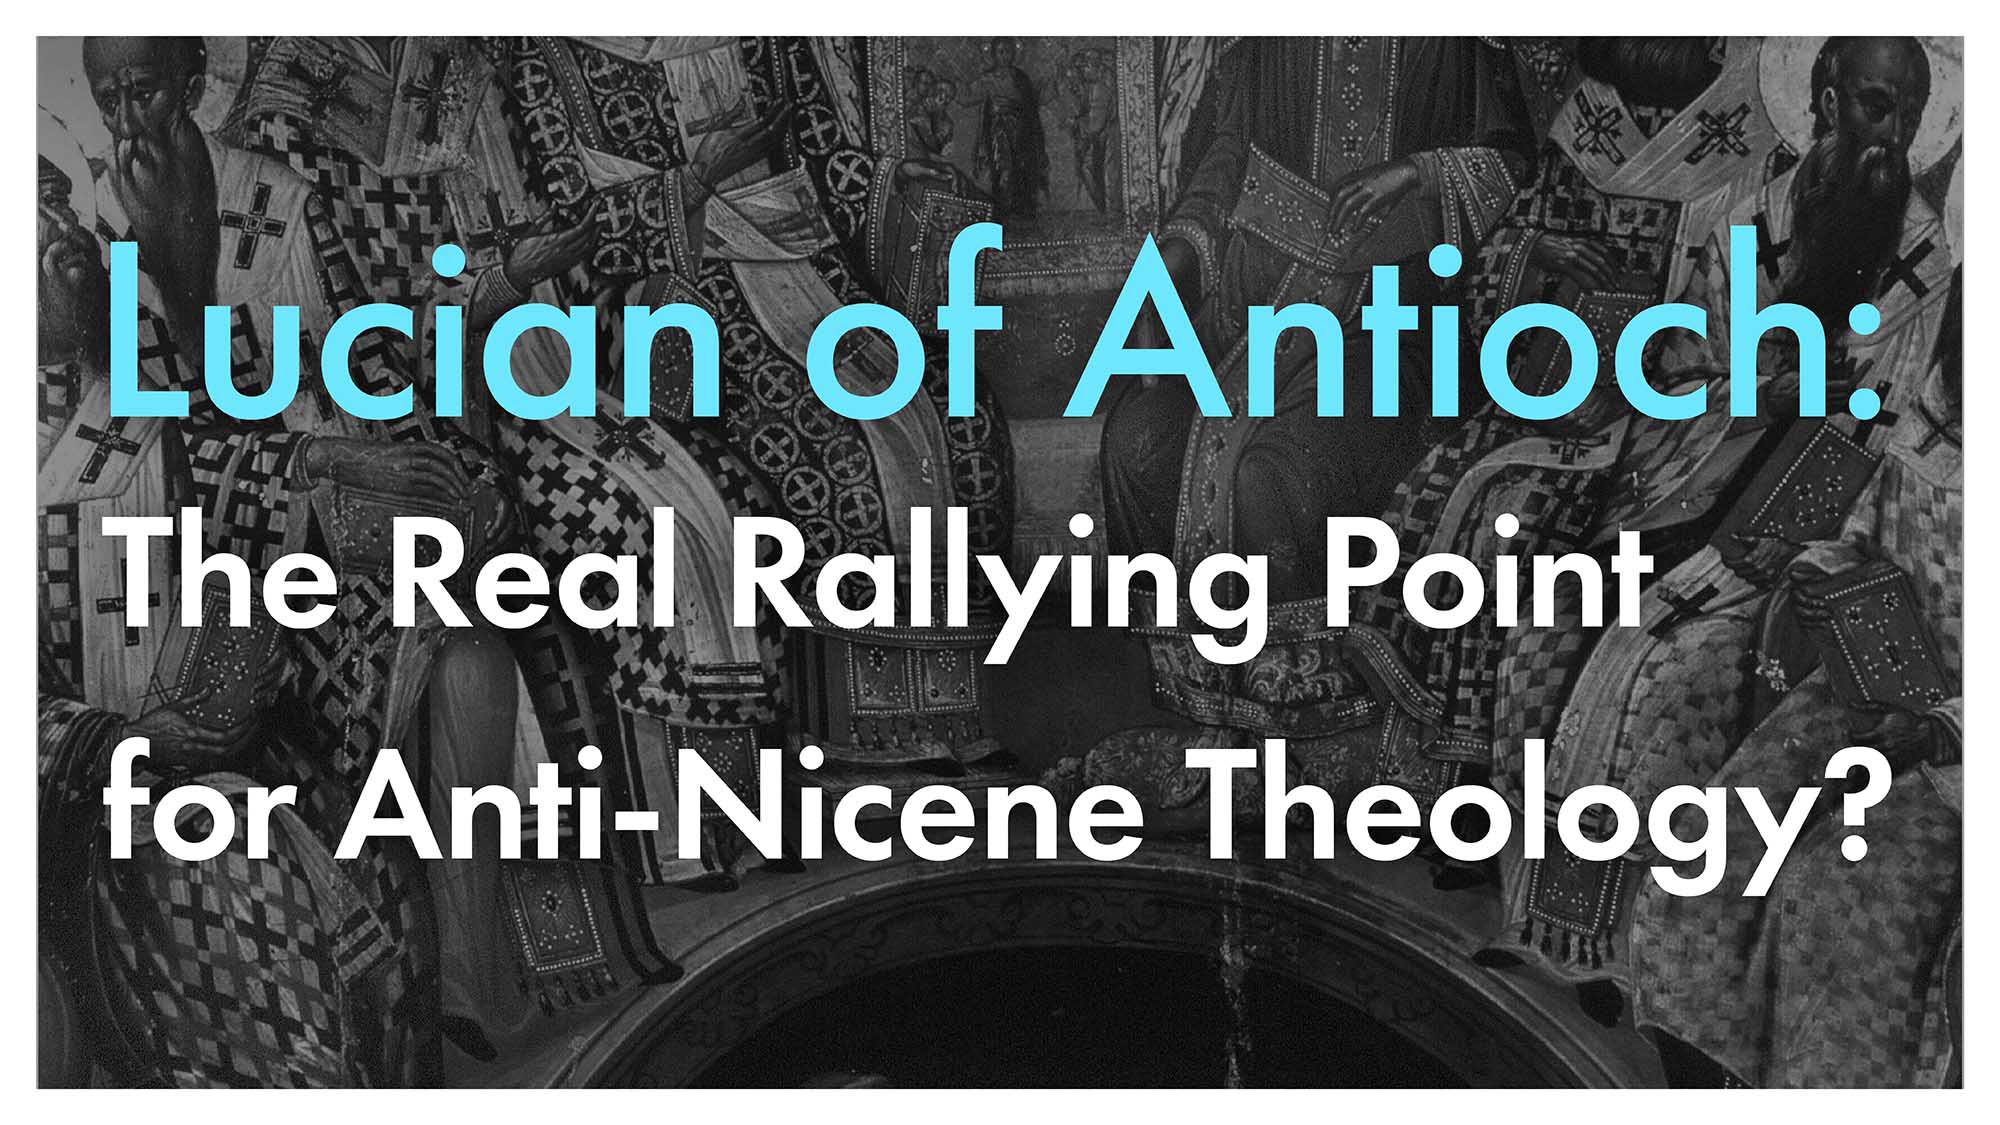 Lucian of Antioch: The Real Rallying Point for Anti-Nicene Theology?